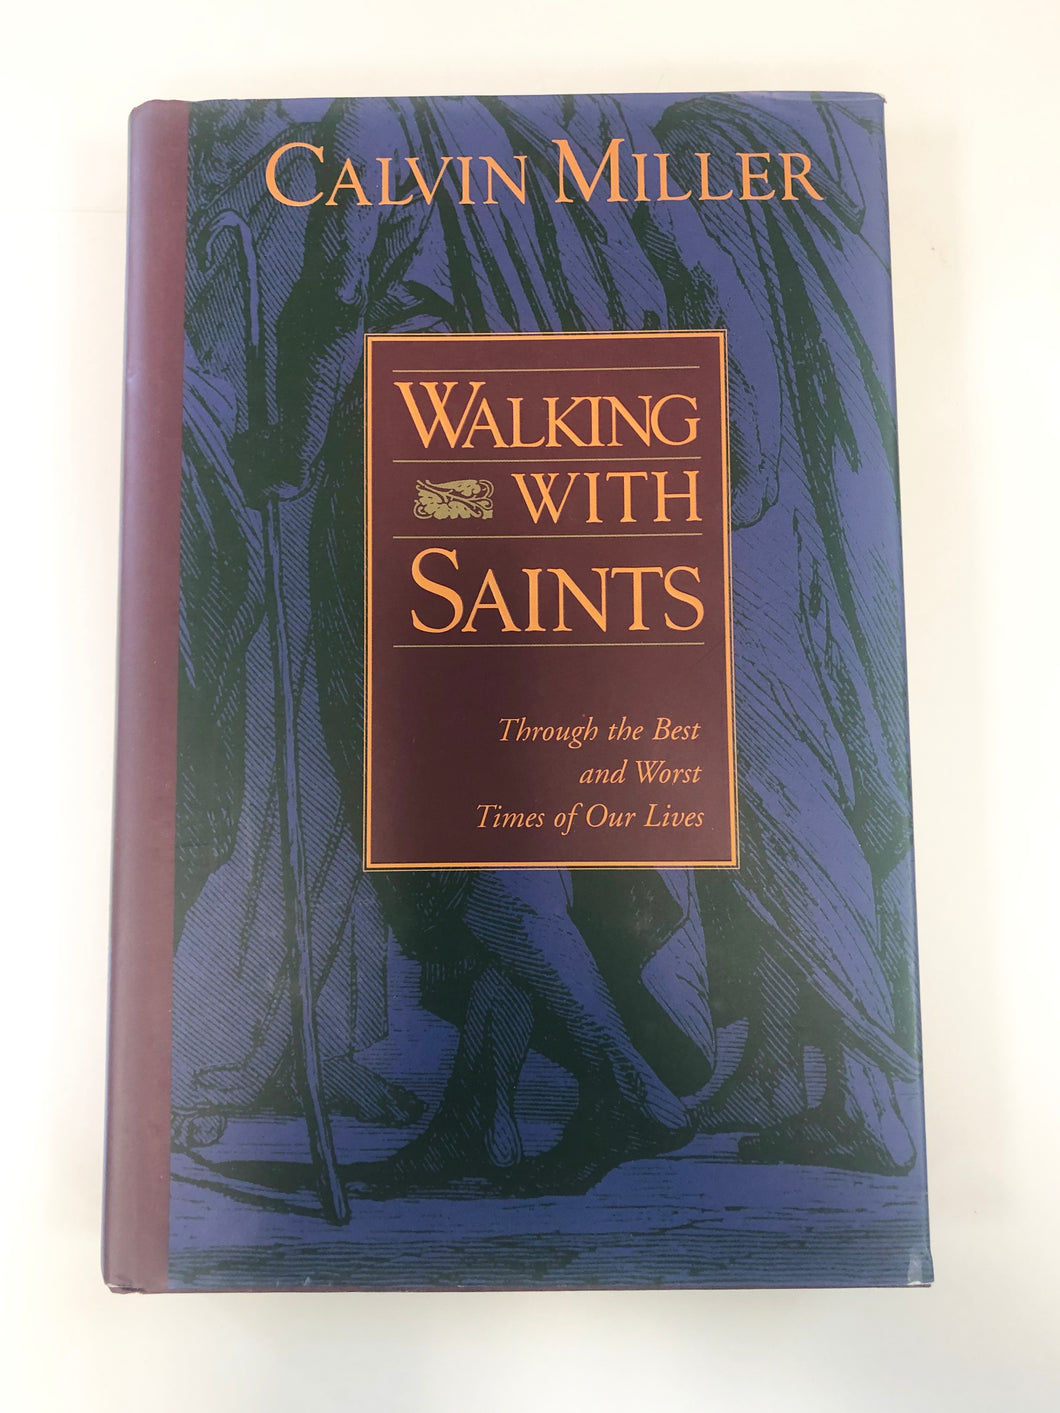 Walking with Saints: Through the Best and Worst Times of Our Lives by Calvin Miller